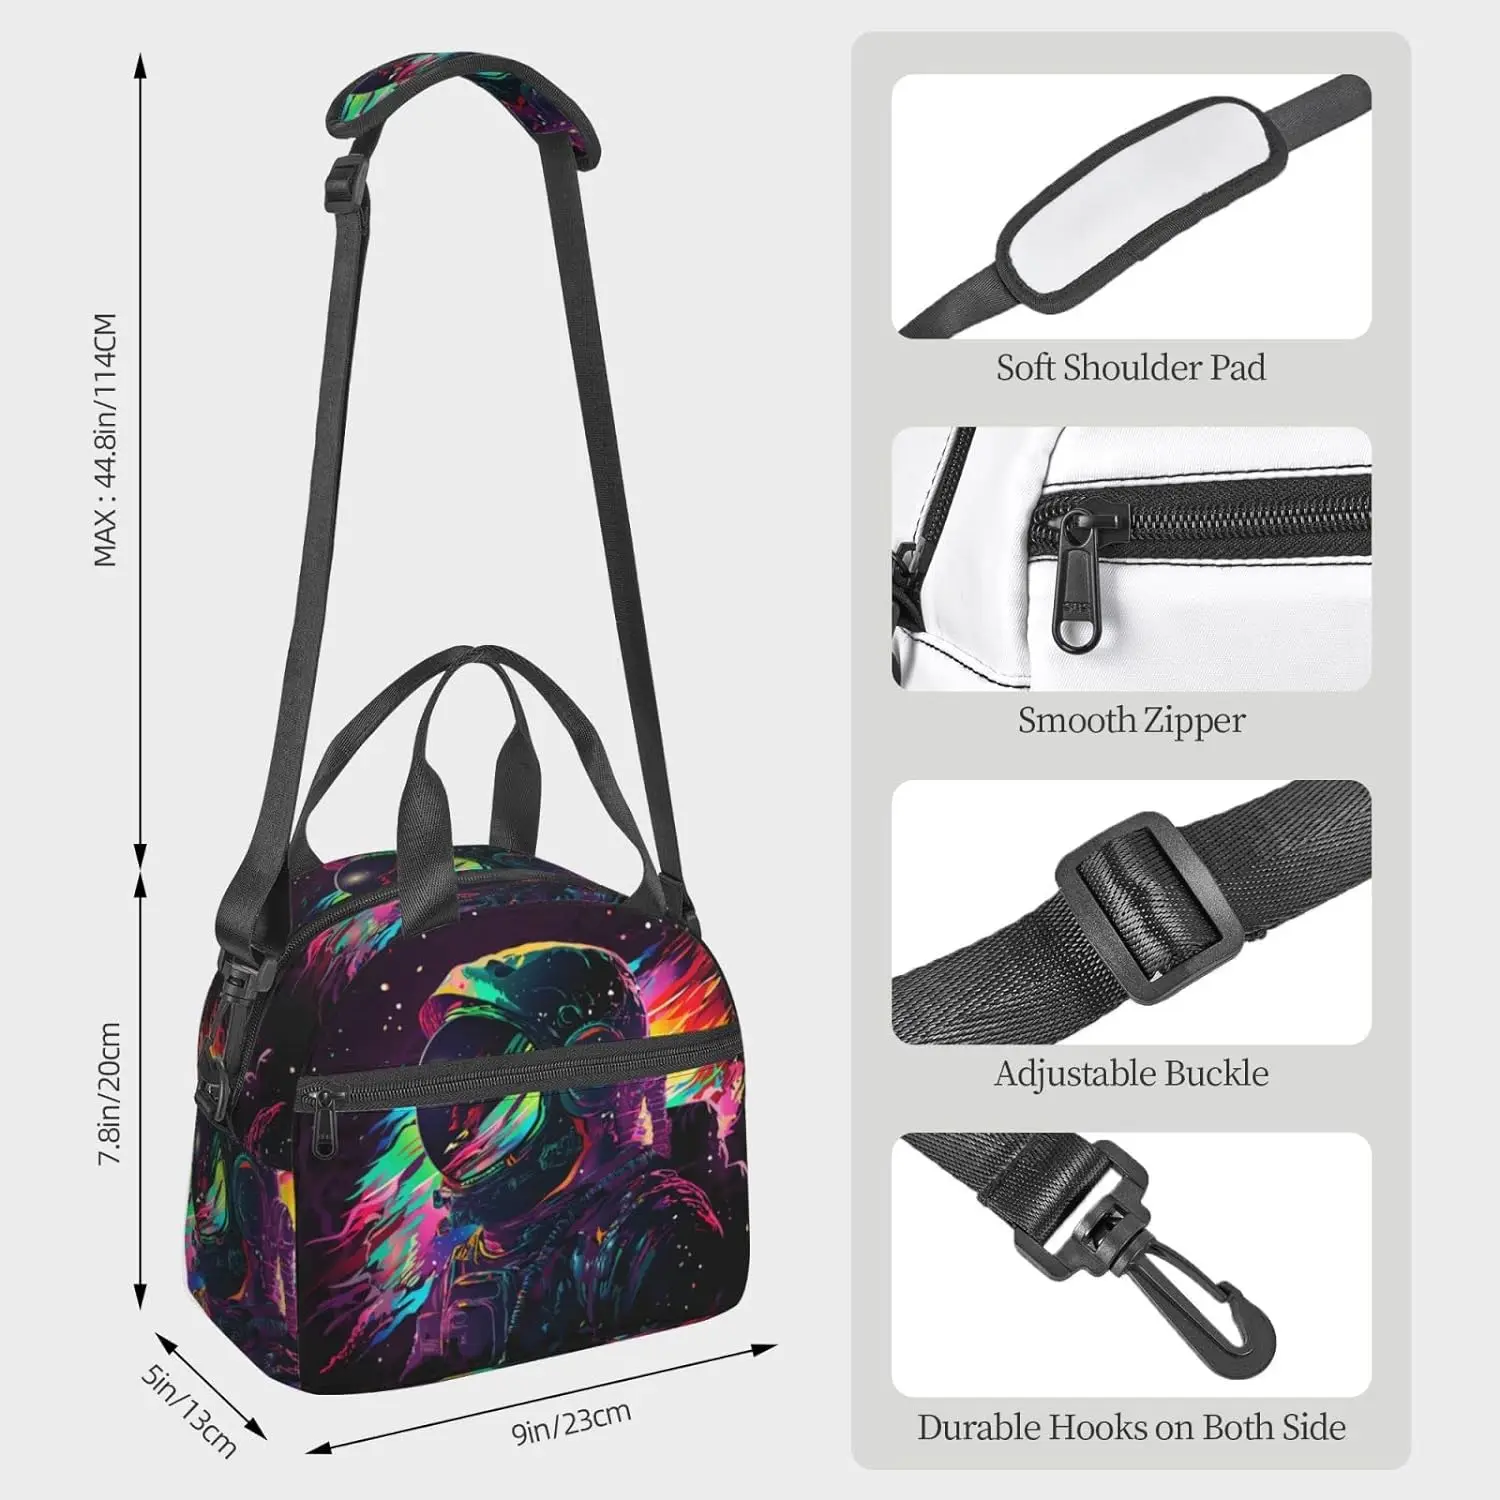 Astronaut Colorful Insulated Lunch Bag with Straps for Women and Men, Waterproof Tote Bag for Office and Travel